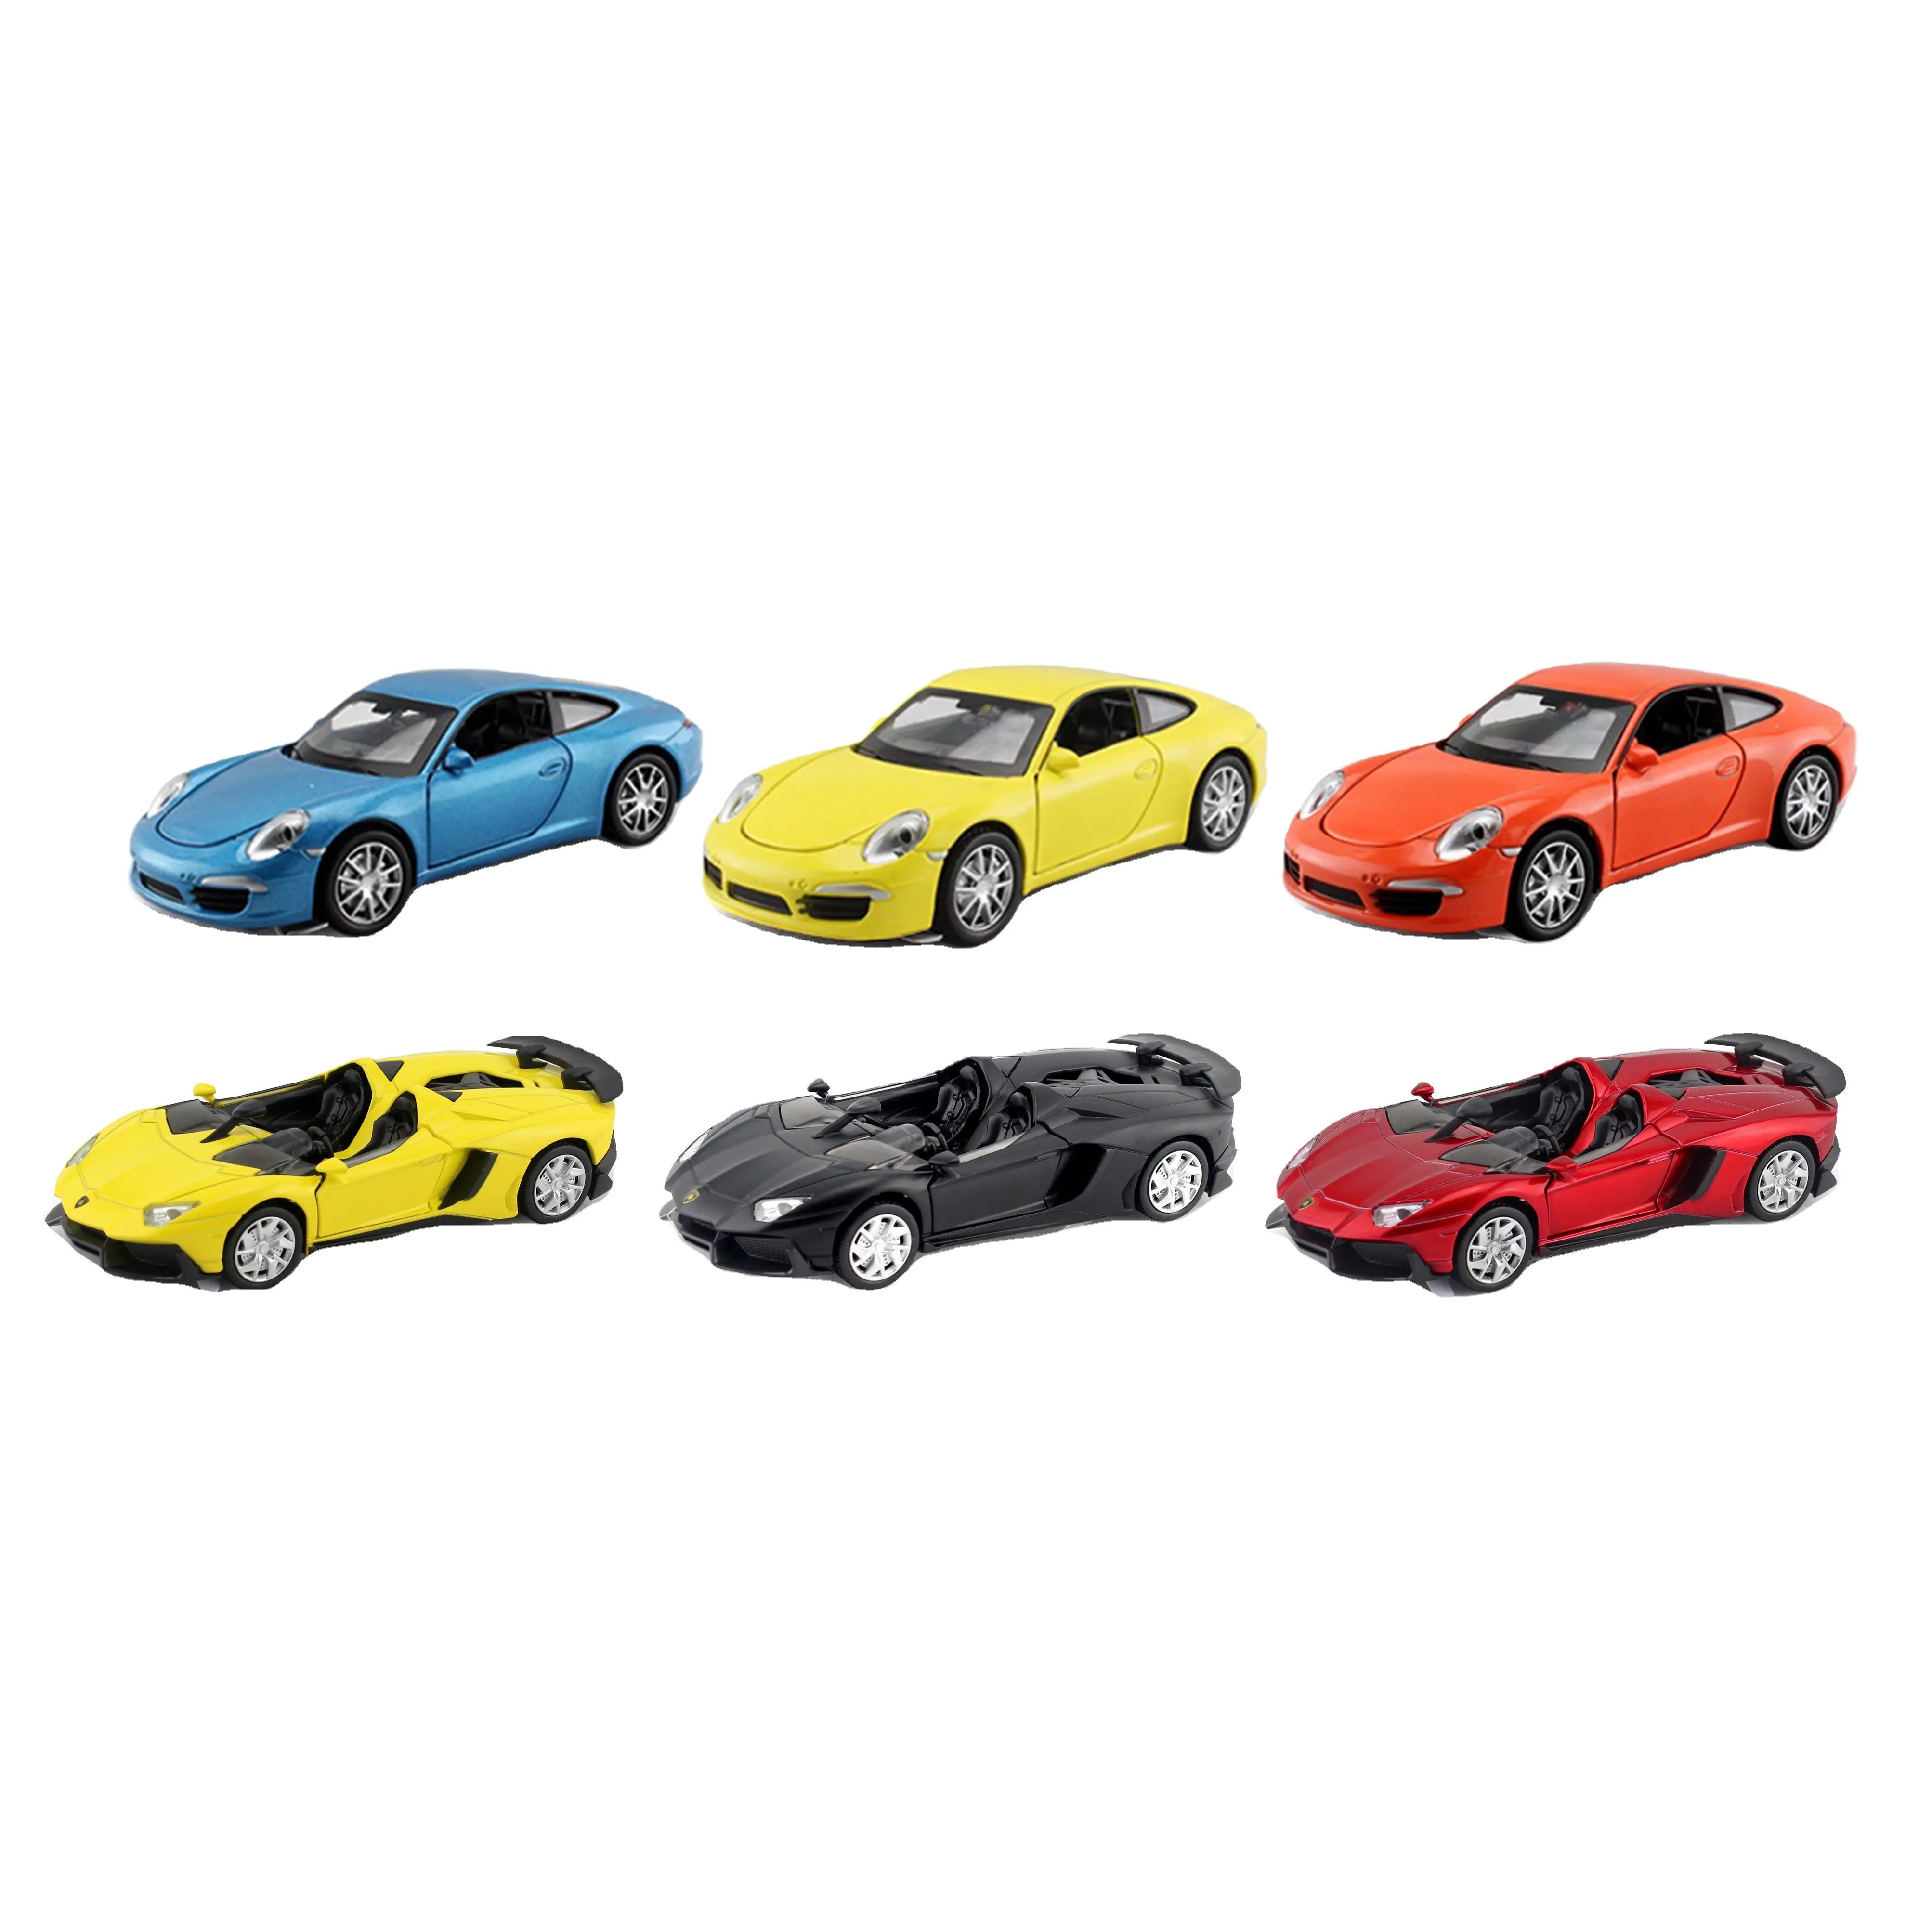 HOT Selling 1:32 Metal Die-cast Car Simulation Alloy Car Collection Gift Vehicle Die Cast Car With Sounds and Light Doors Open